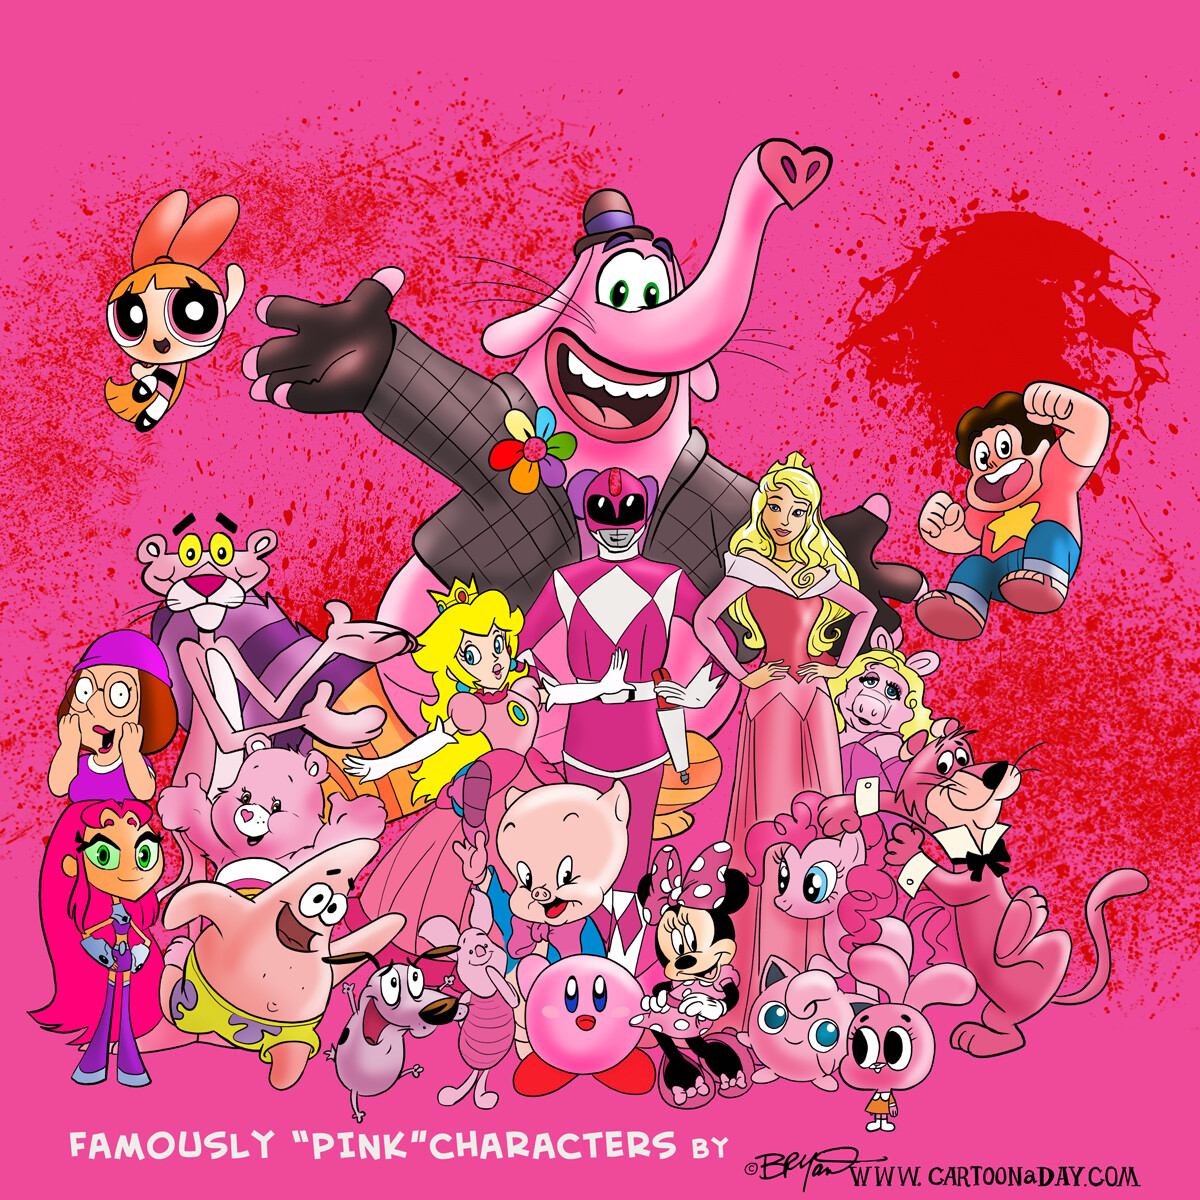 Hot Pink Characters